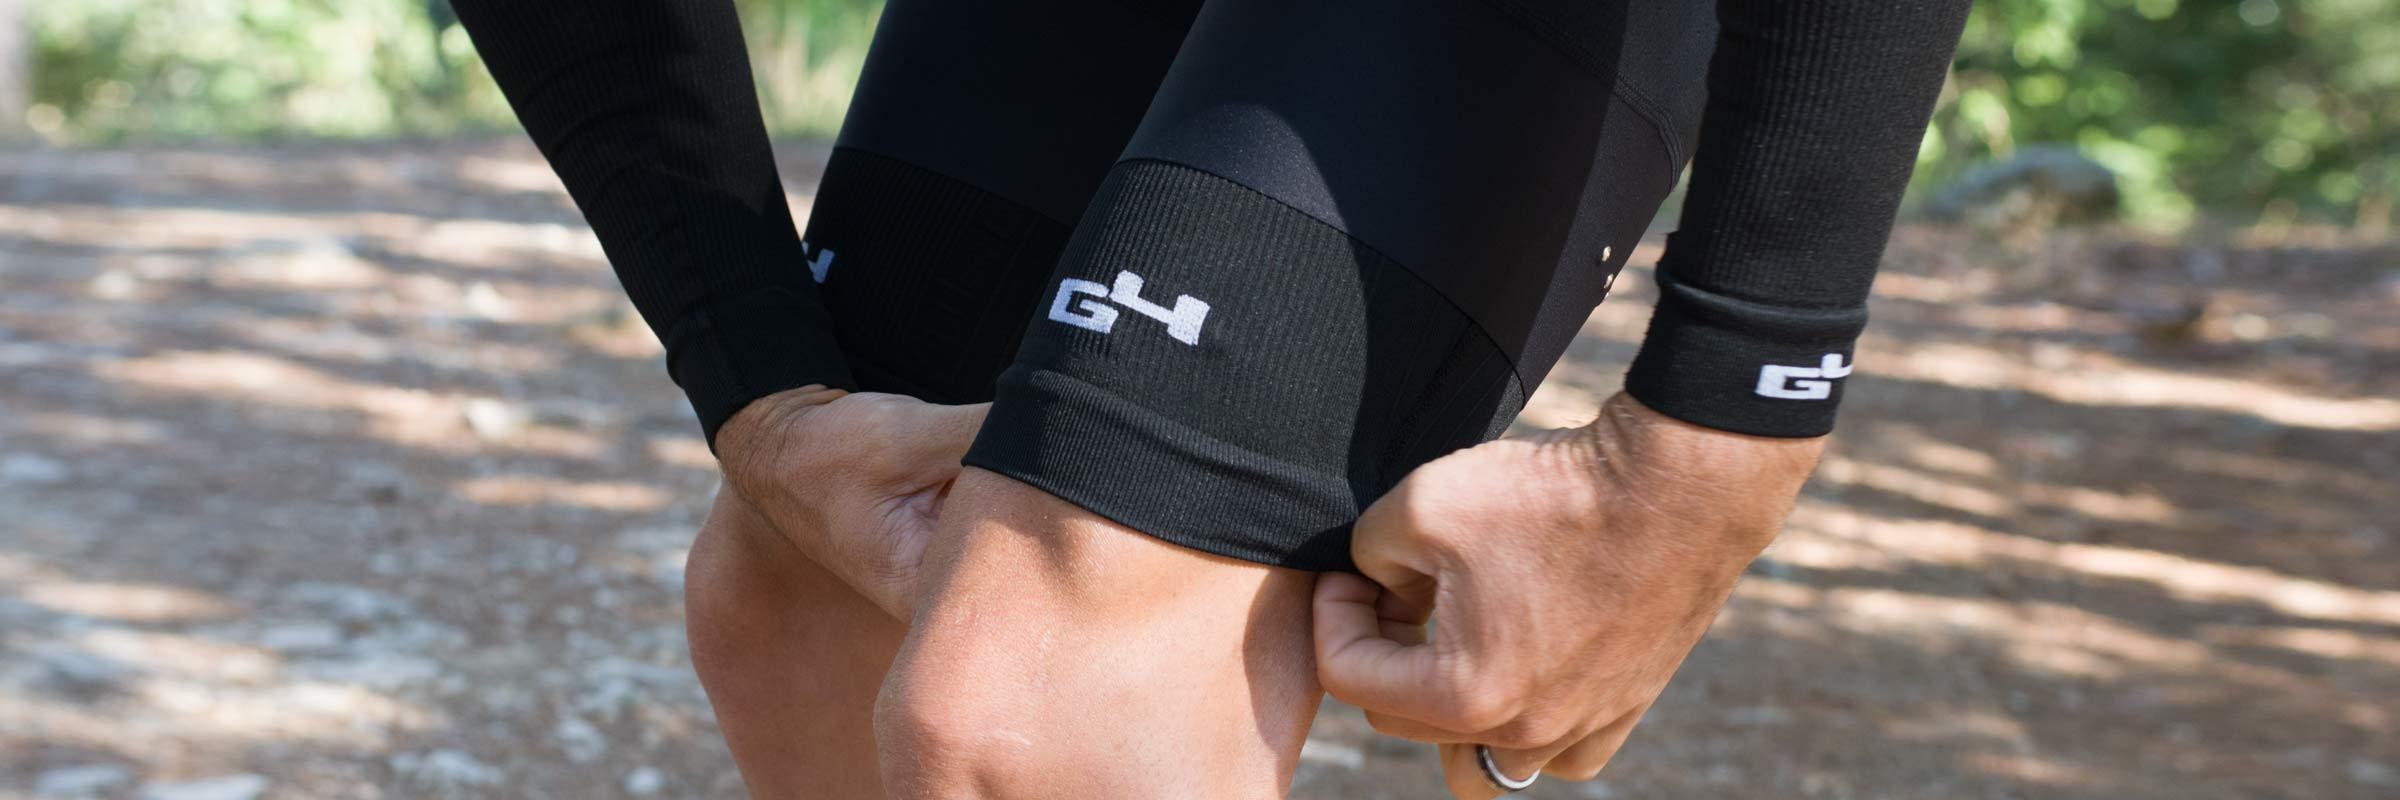 Cycling legs and arms warmers - G4 dimension